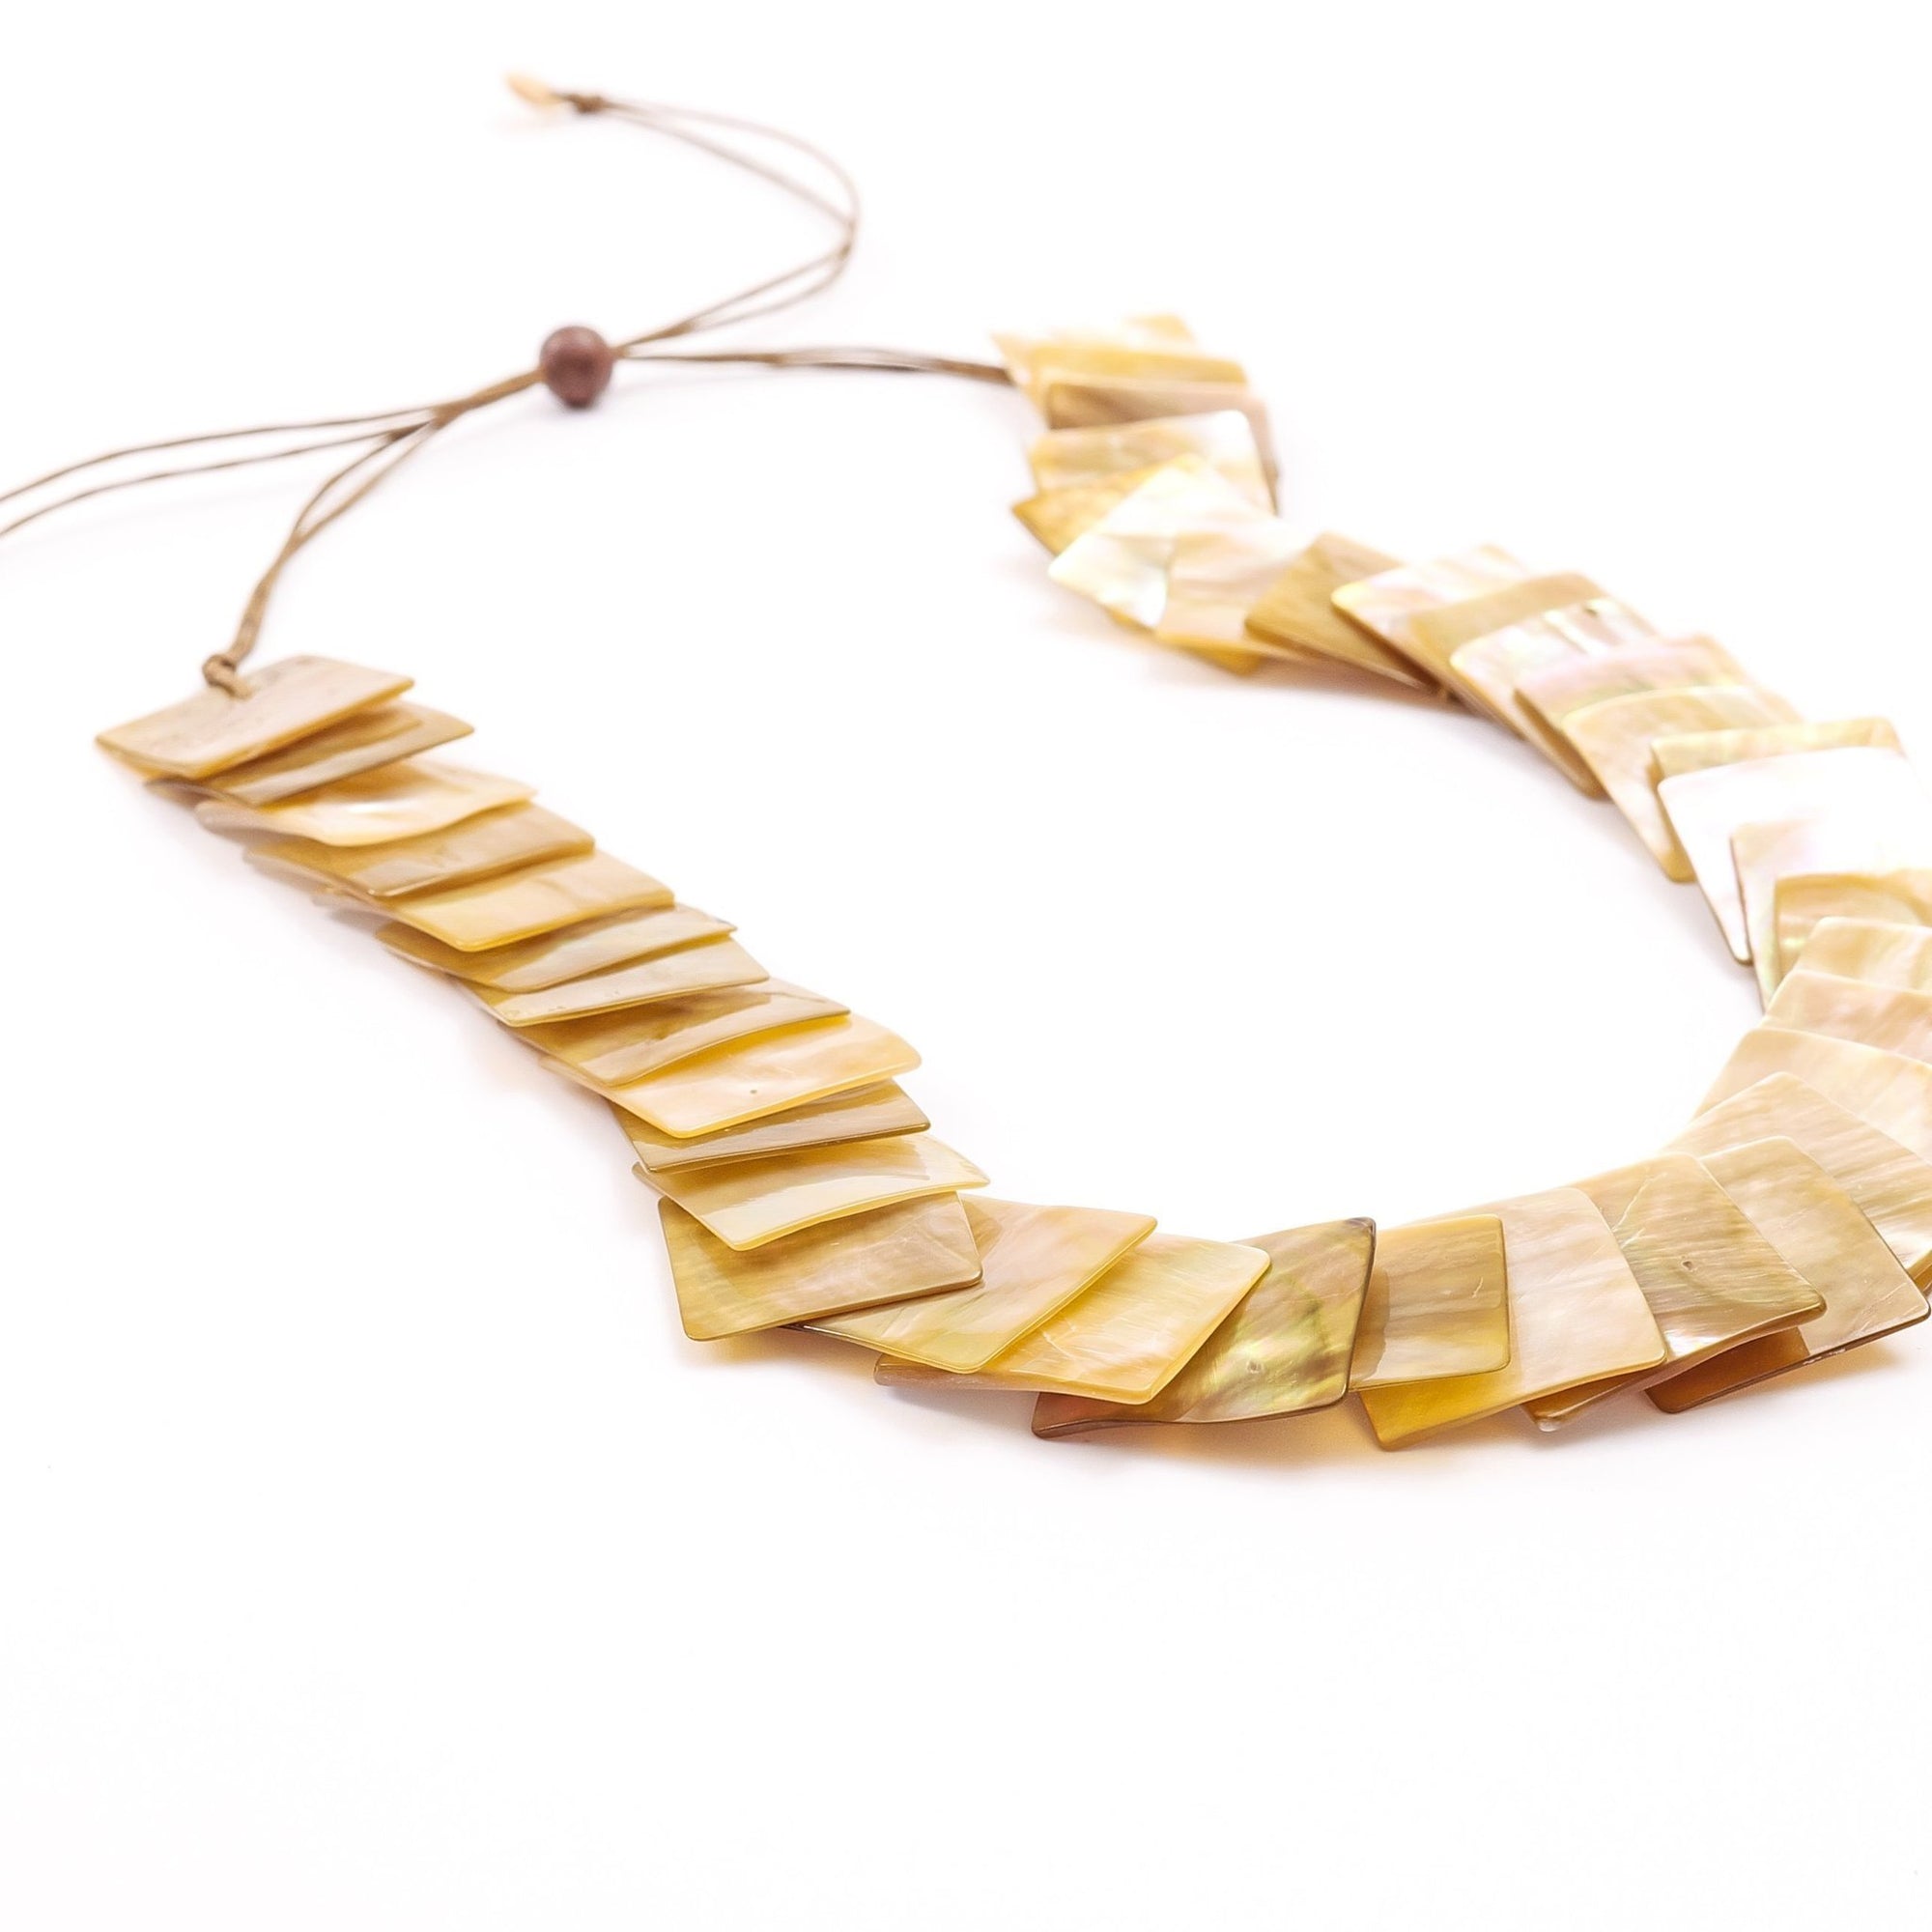 Jewelry - Mother of Pearl Long Necklace - Nude Brown | LIKHÂ - LIKHÂ